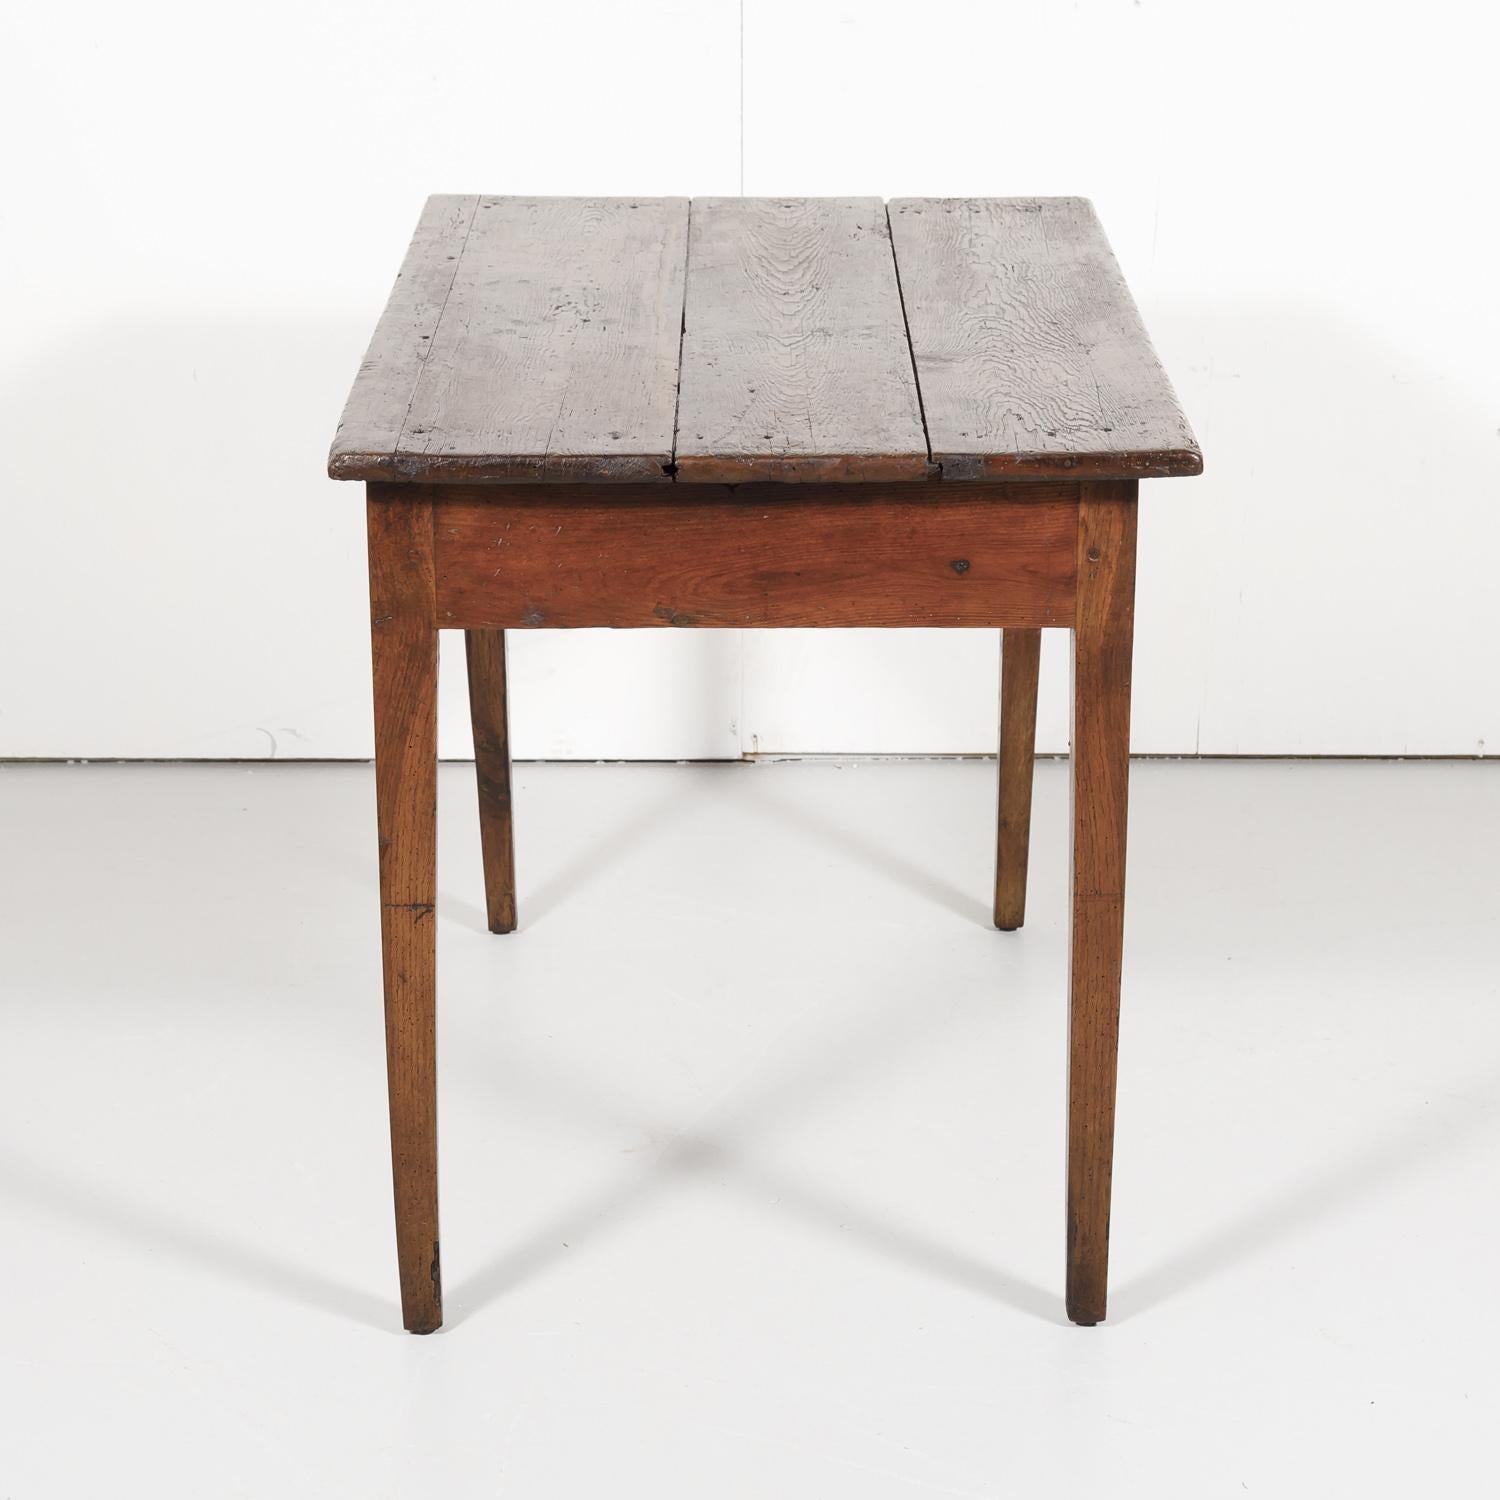 Early 19th Century Primitive French Country Side Table or Work Table 8